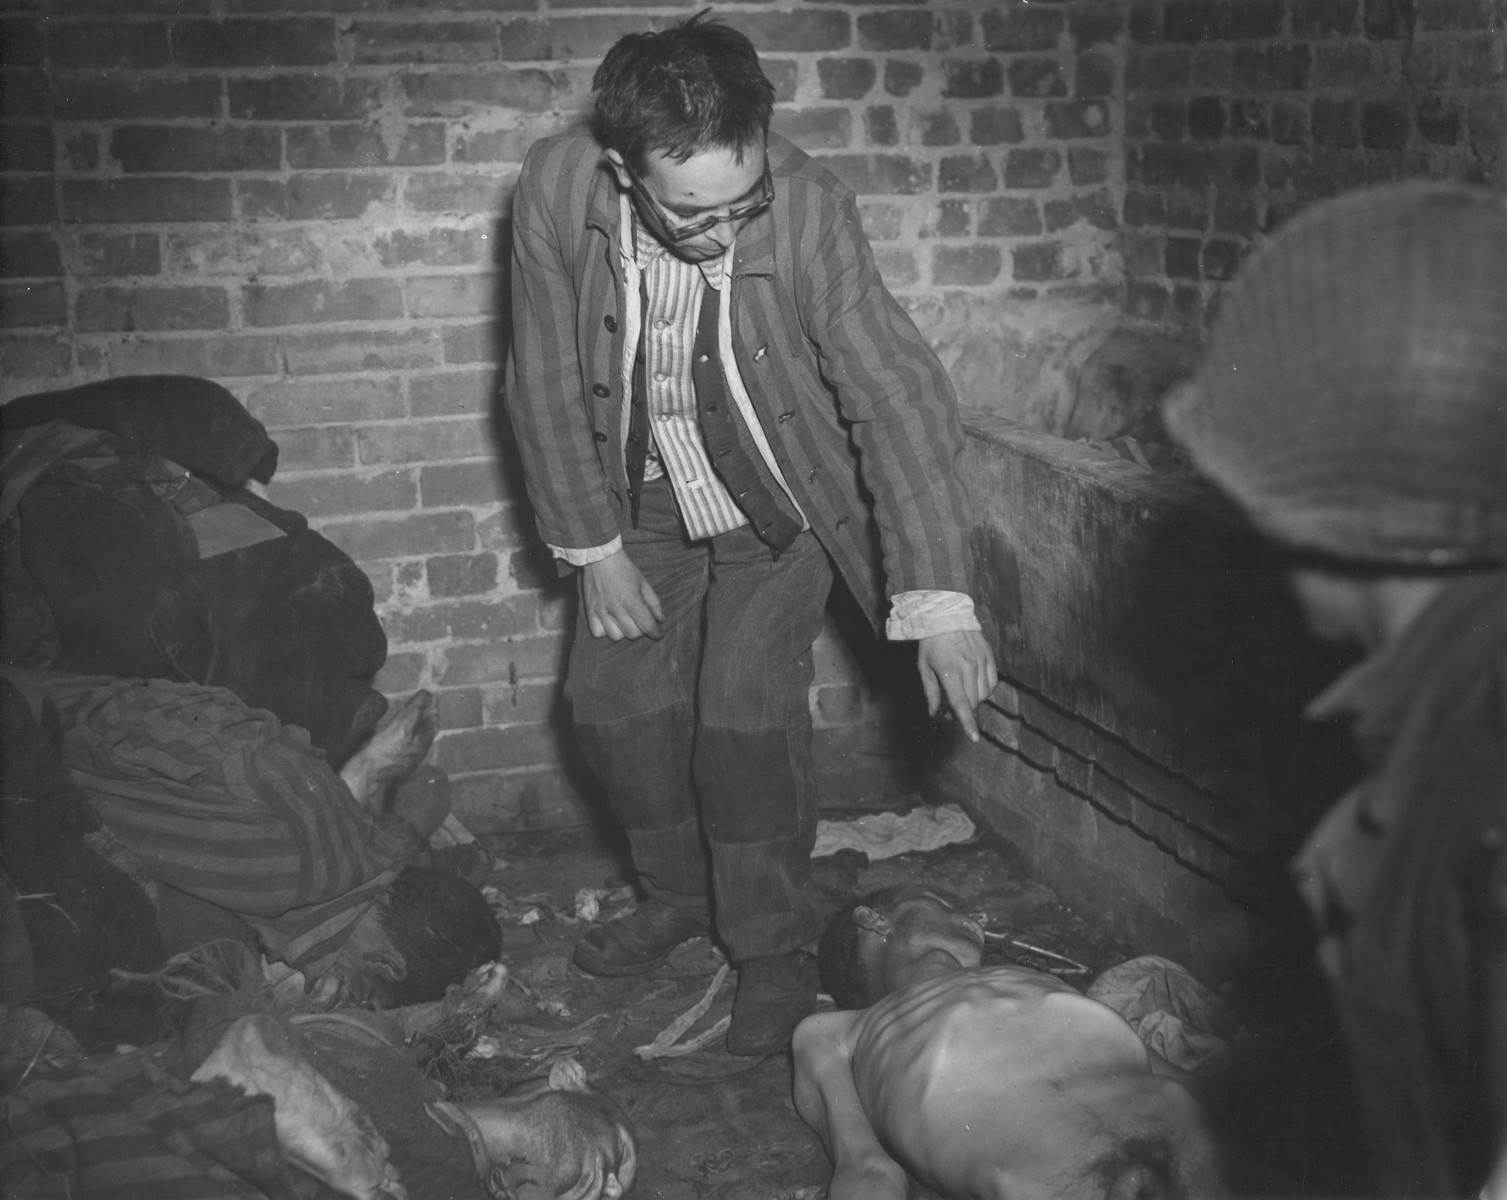 David Rousset, a liberated prisoner who is acting as a guide for an American soldier, points out the emaciated corpse of a prisoner lying on the floor of a brick structure in the newly liberated Woebbelin concentration camp.